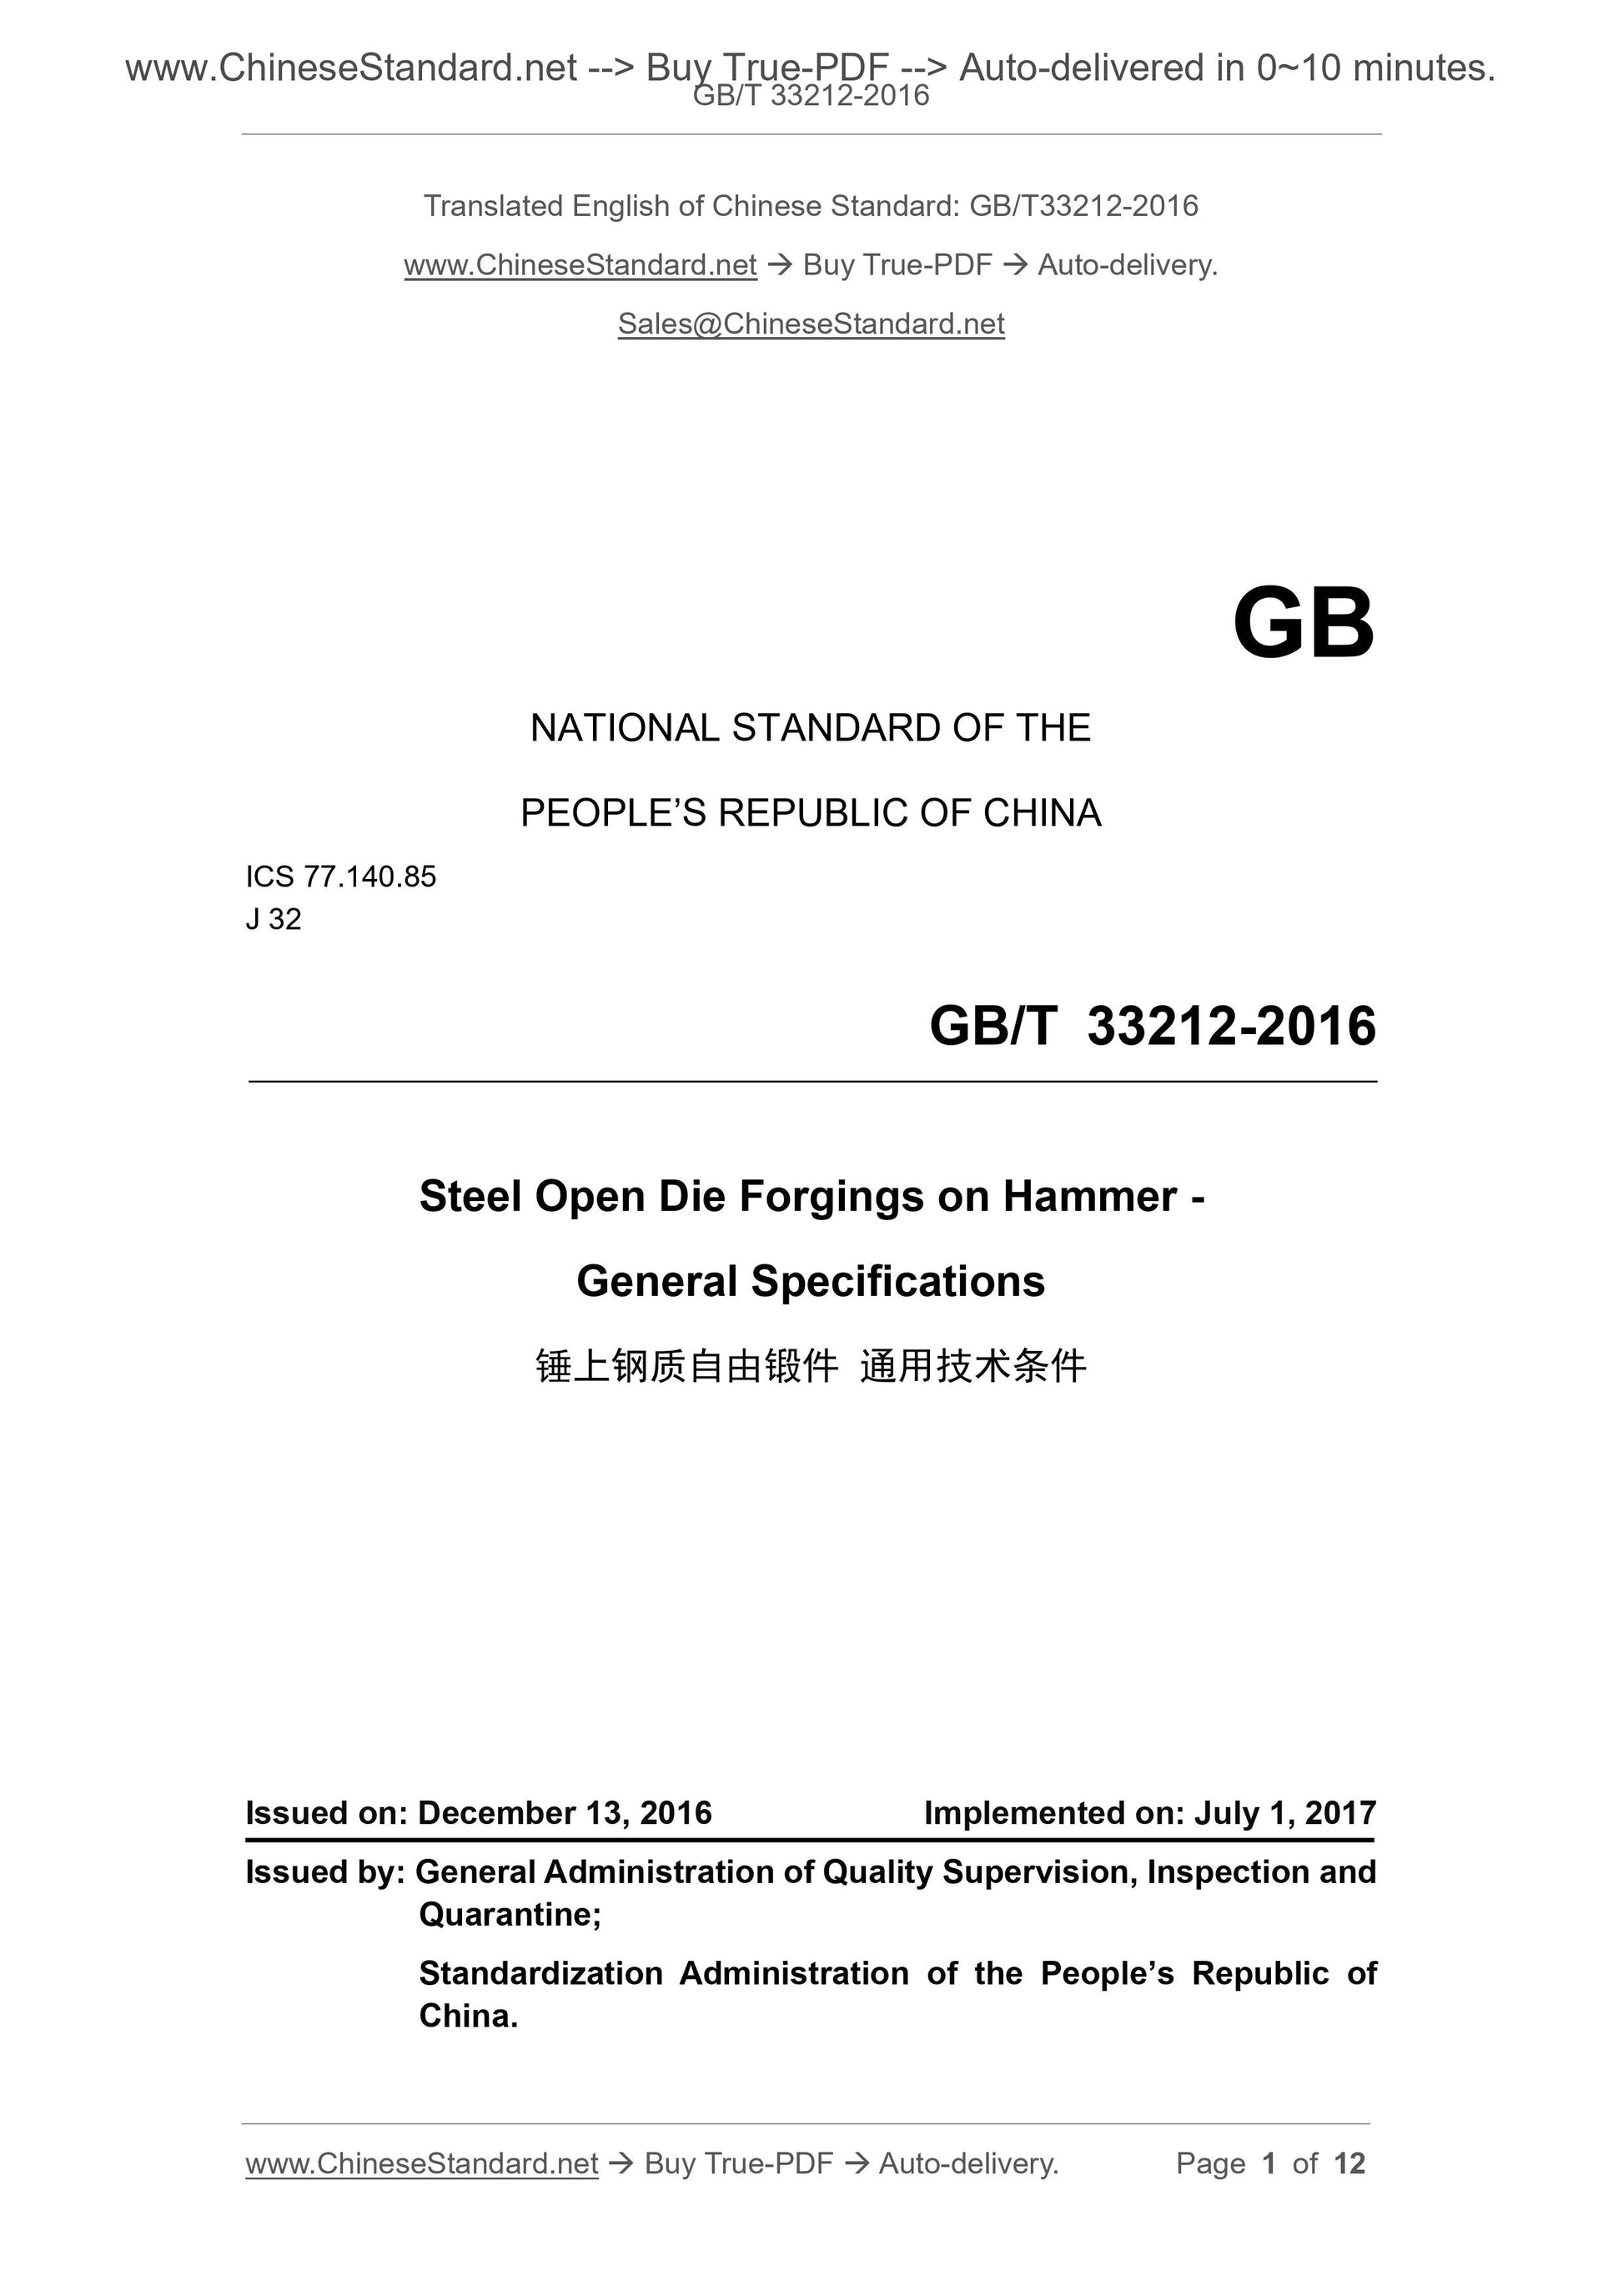 GB/T 33212-2016 Page 1